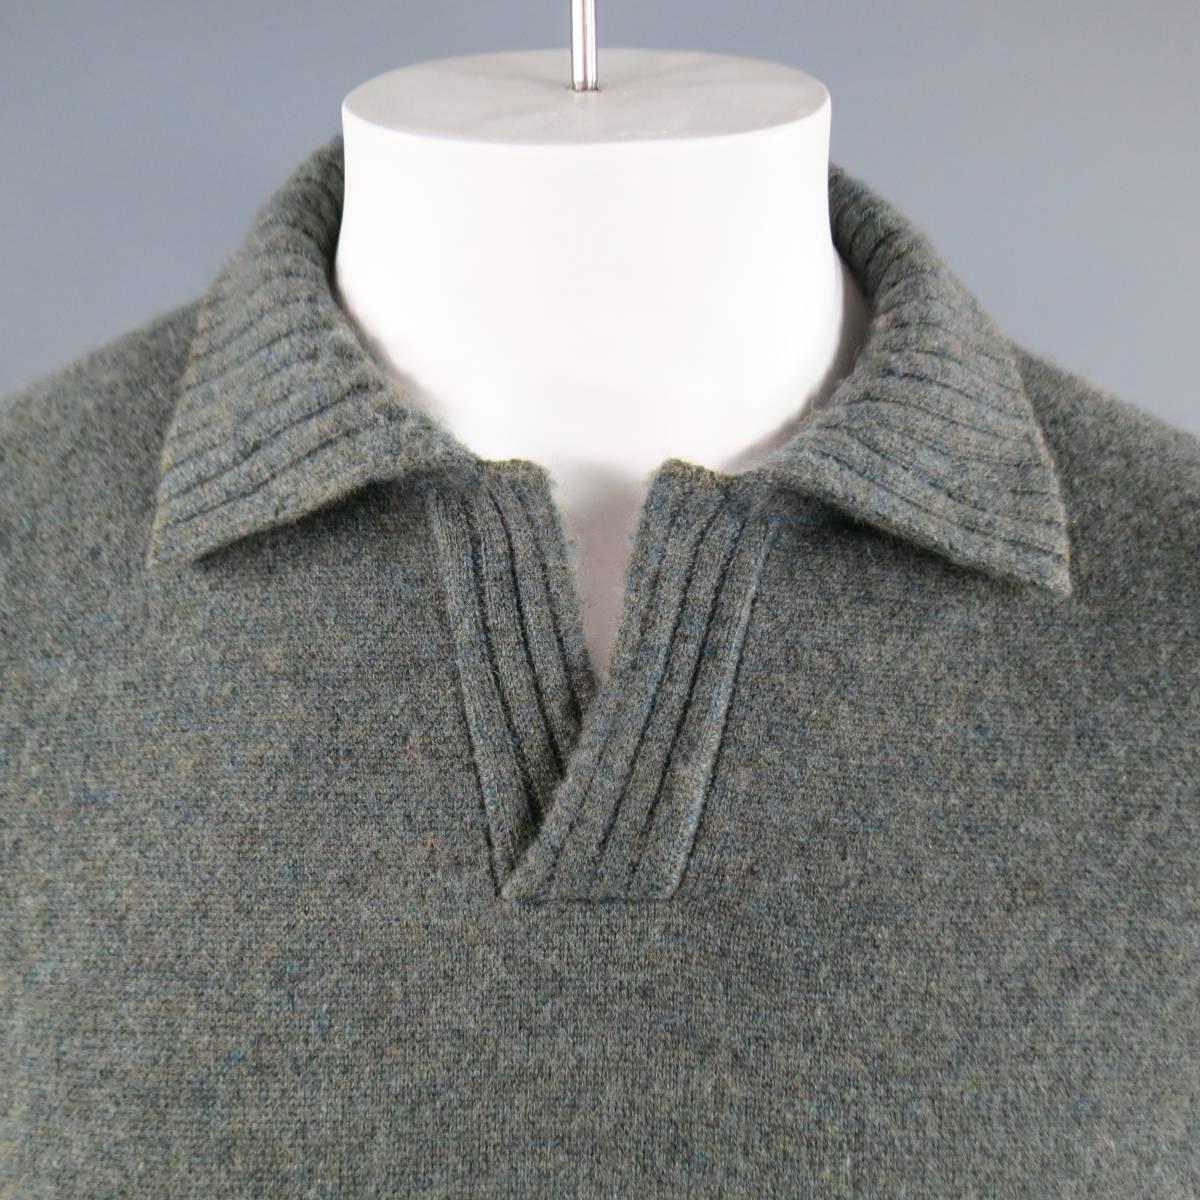 LORO PIANA Pullover consists of 100% cashmere material in a teal green color tone. Designed in a open collar, rib texture with cuff and hem patterning. Detailed with side ribbing going down and back collar suede trim.. Made in Italy.

Good